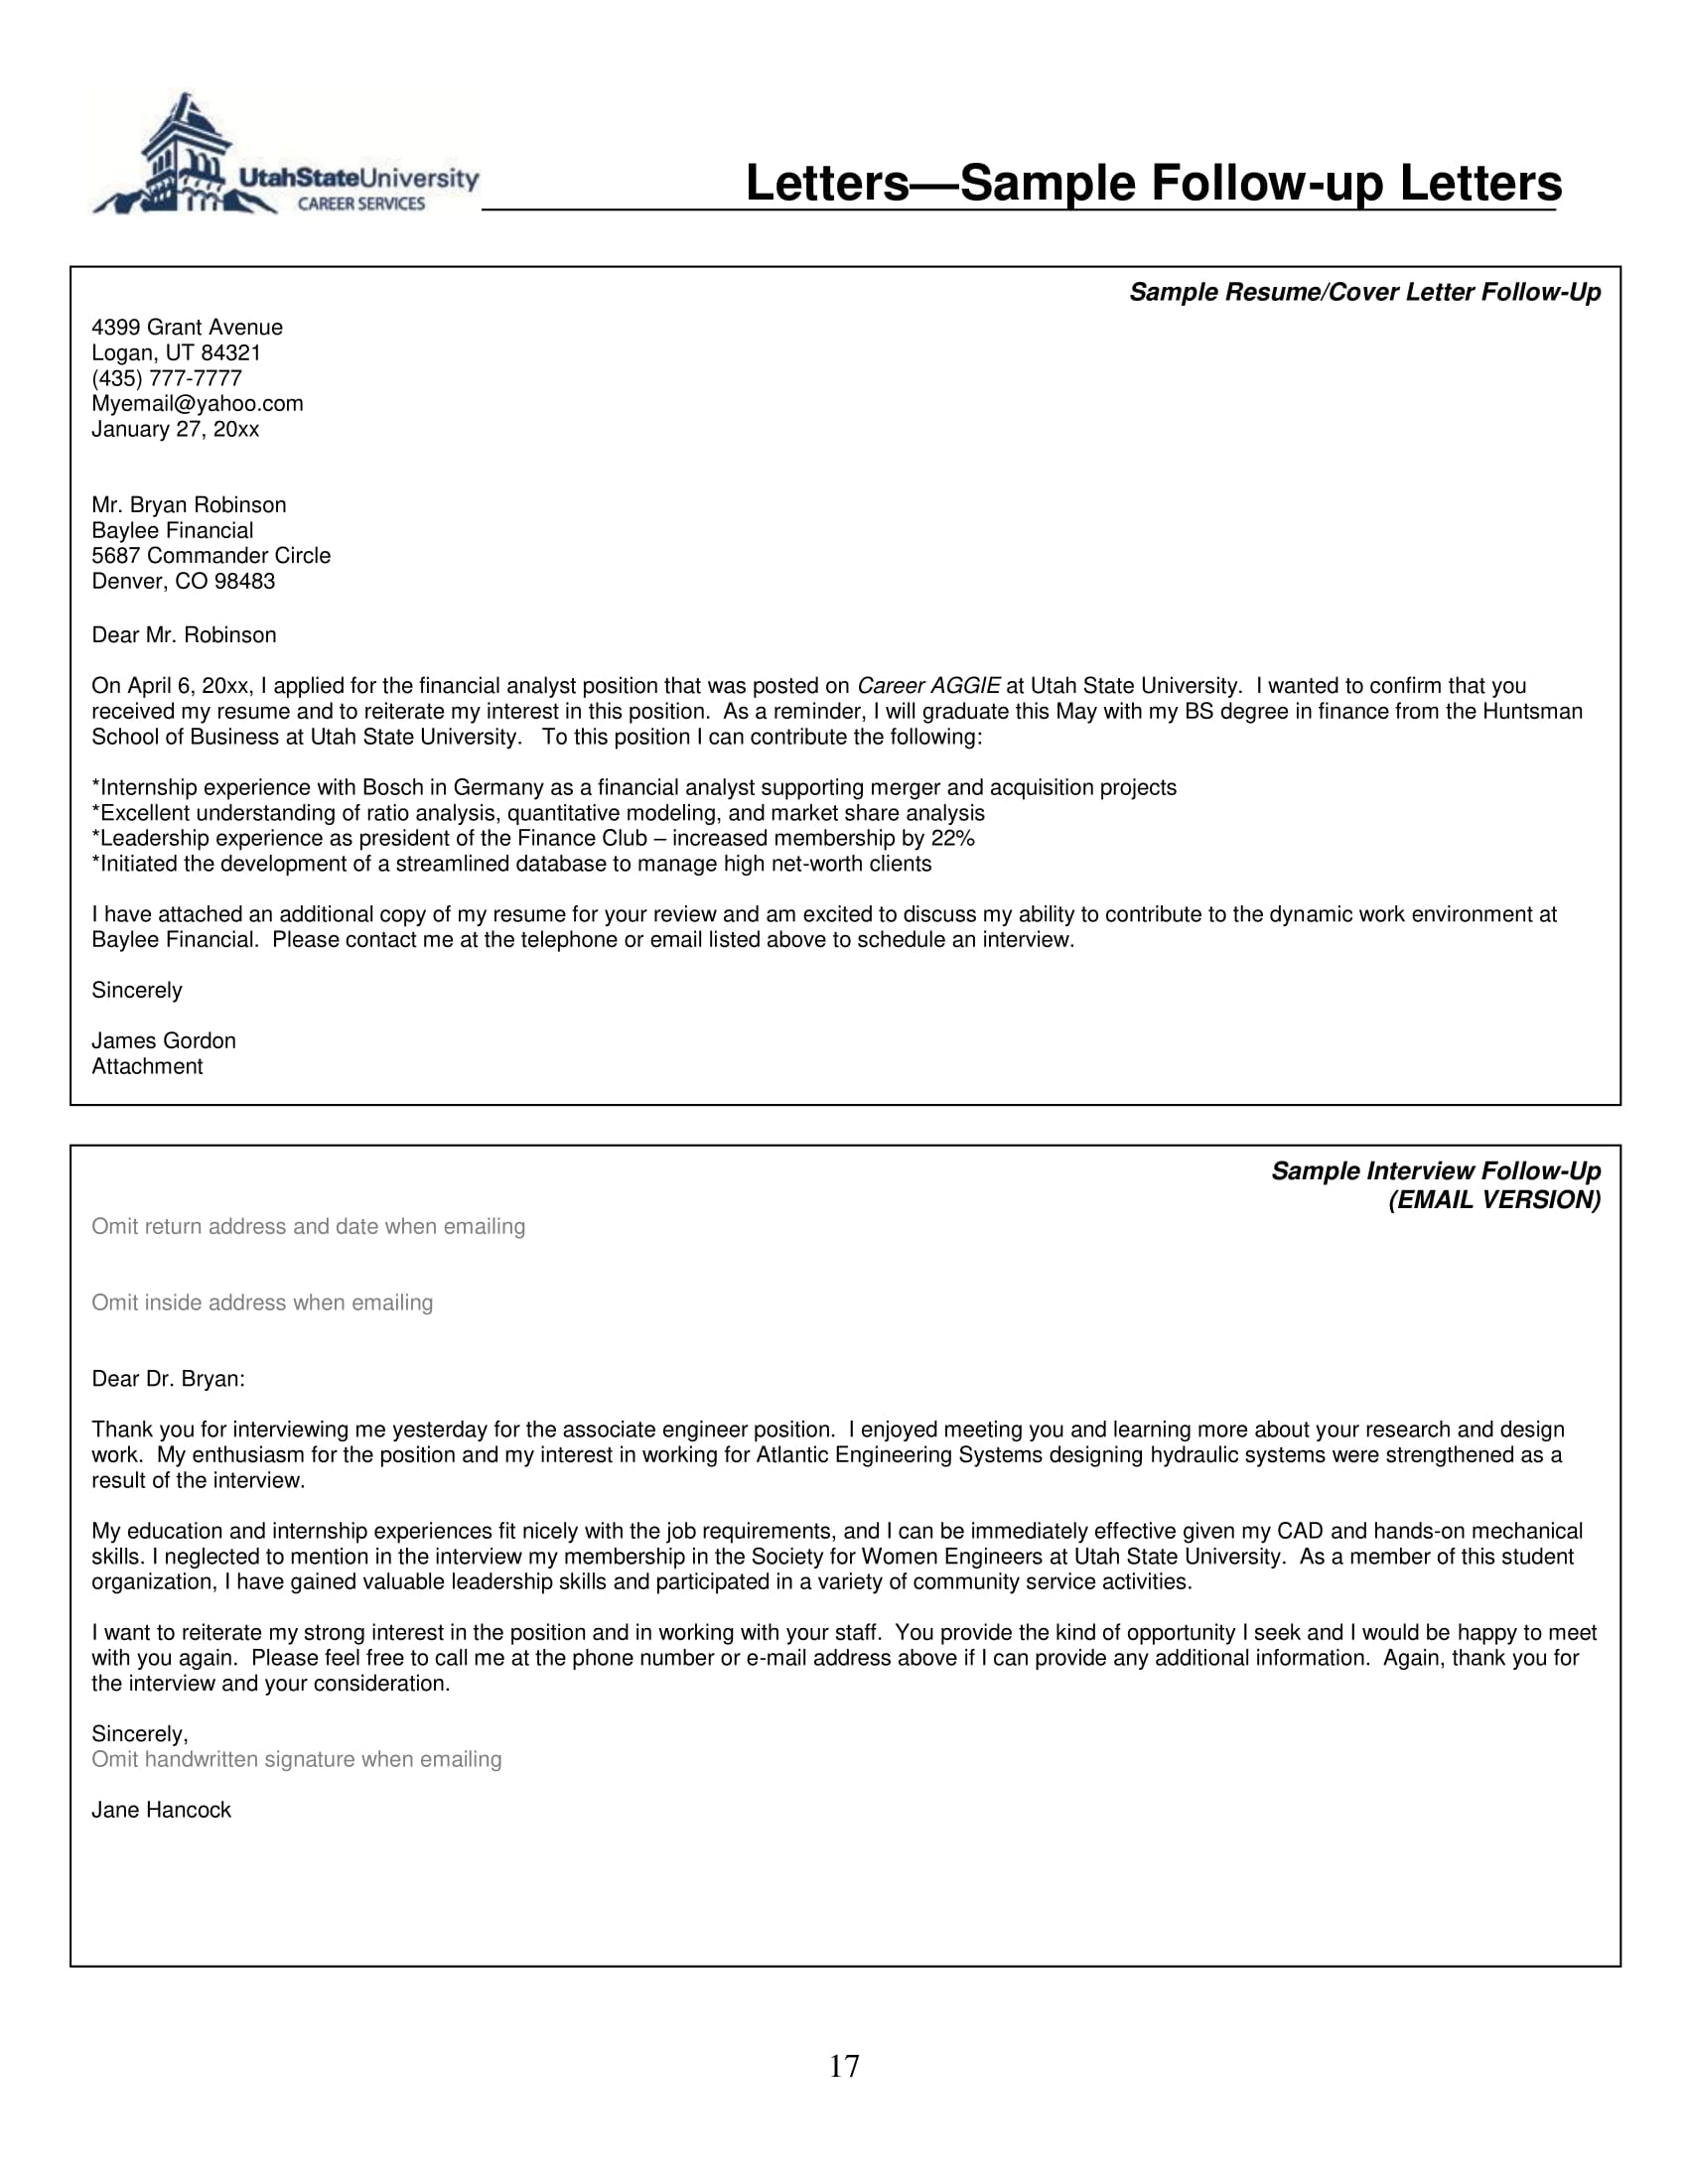 job application follow up letter examples